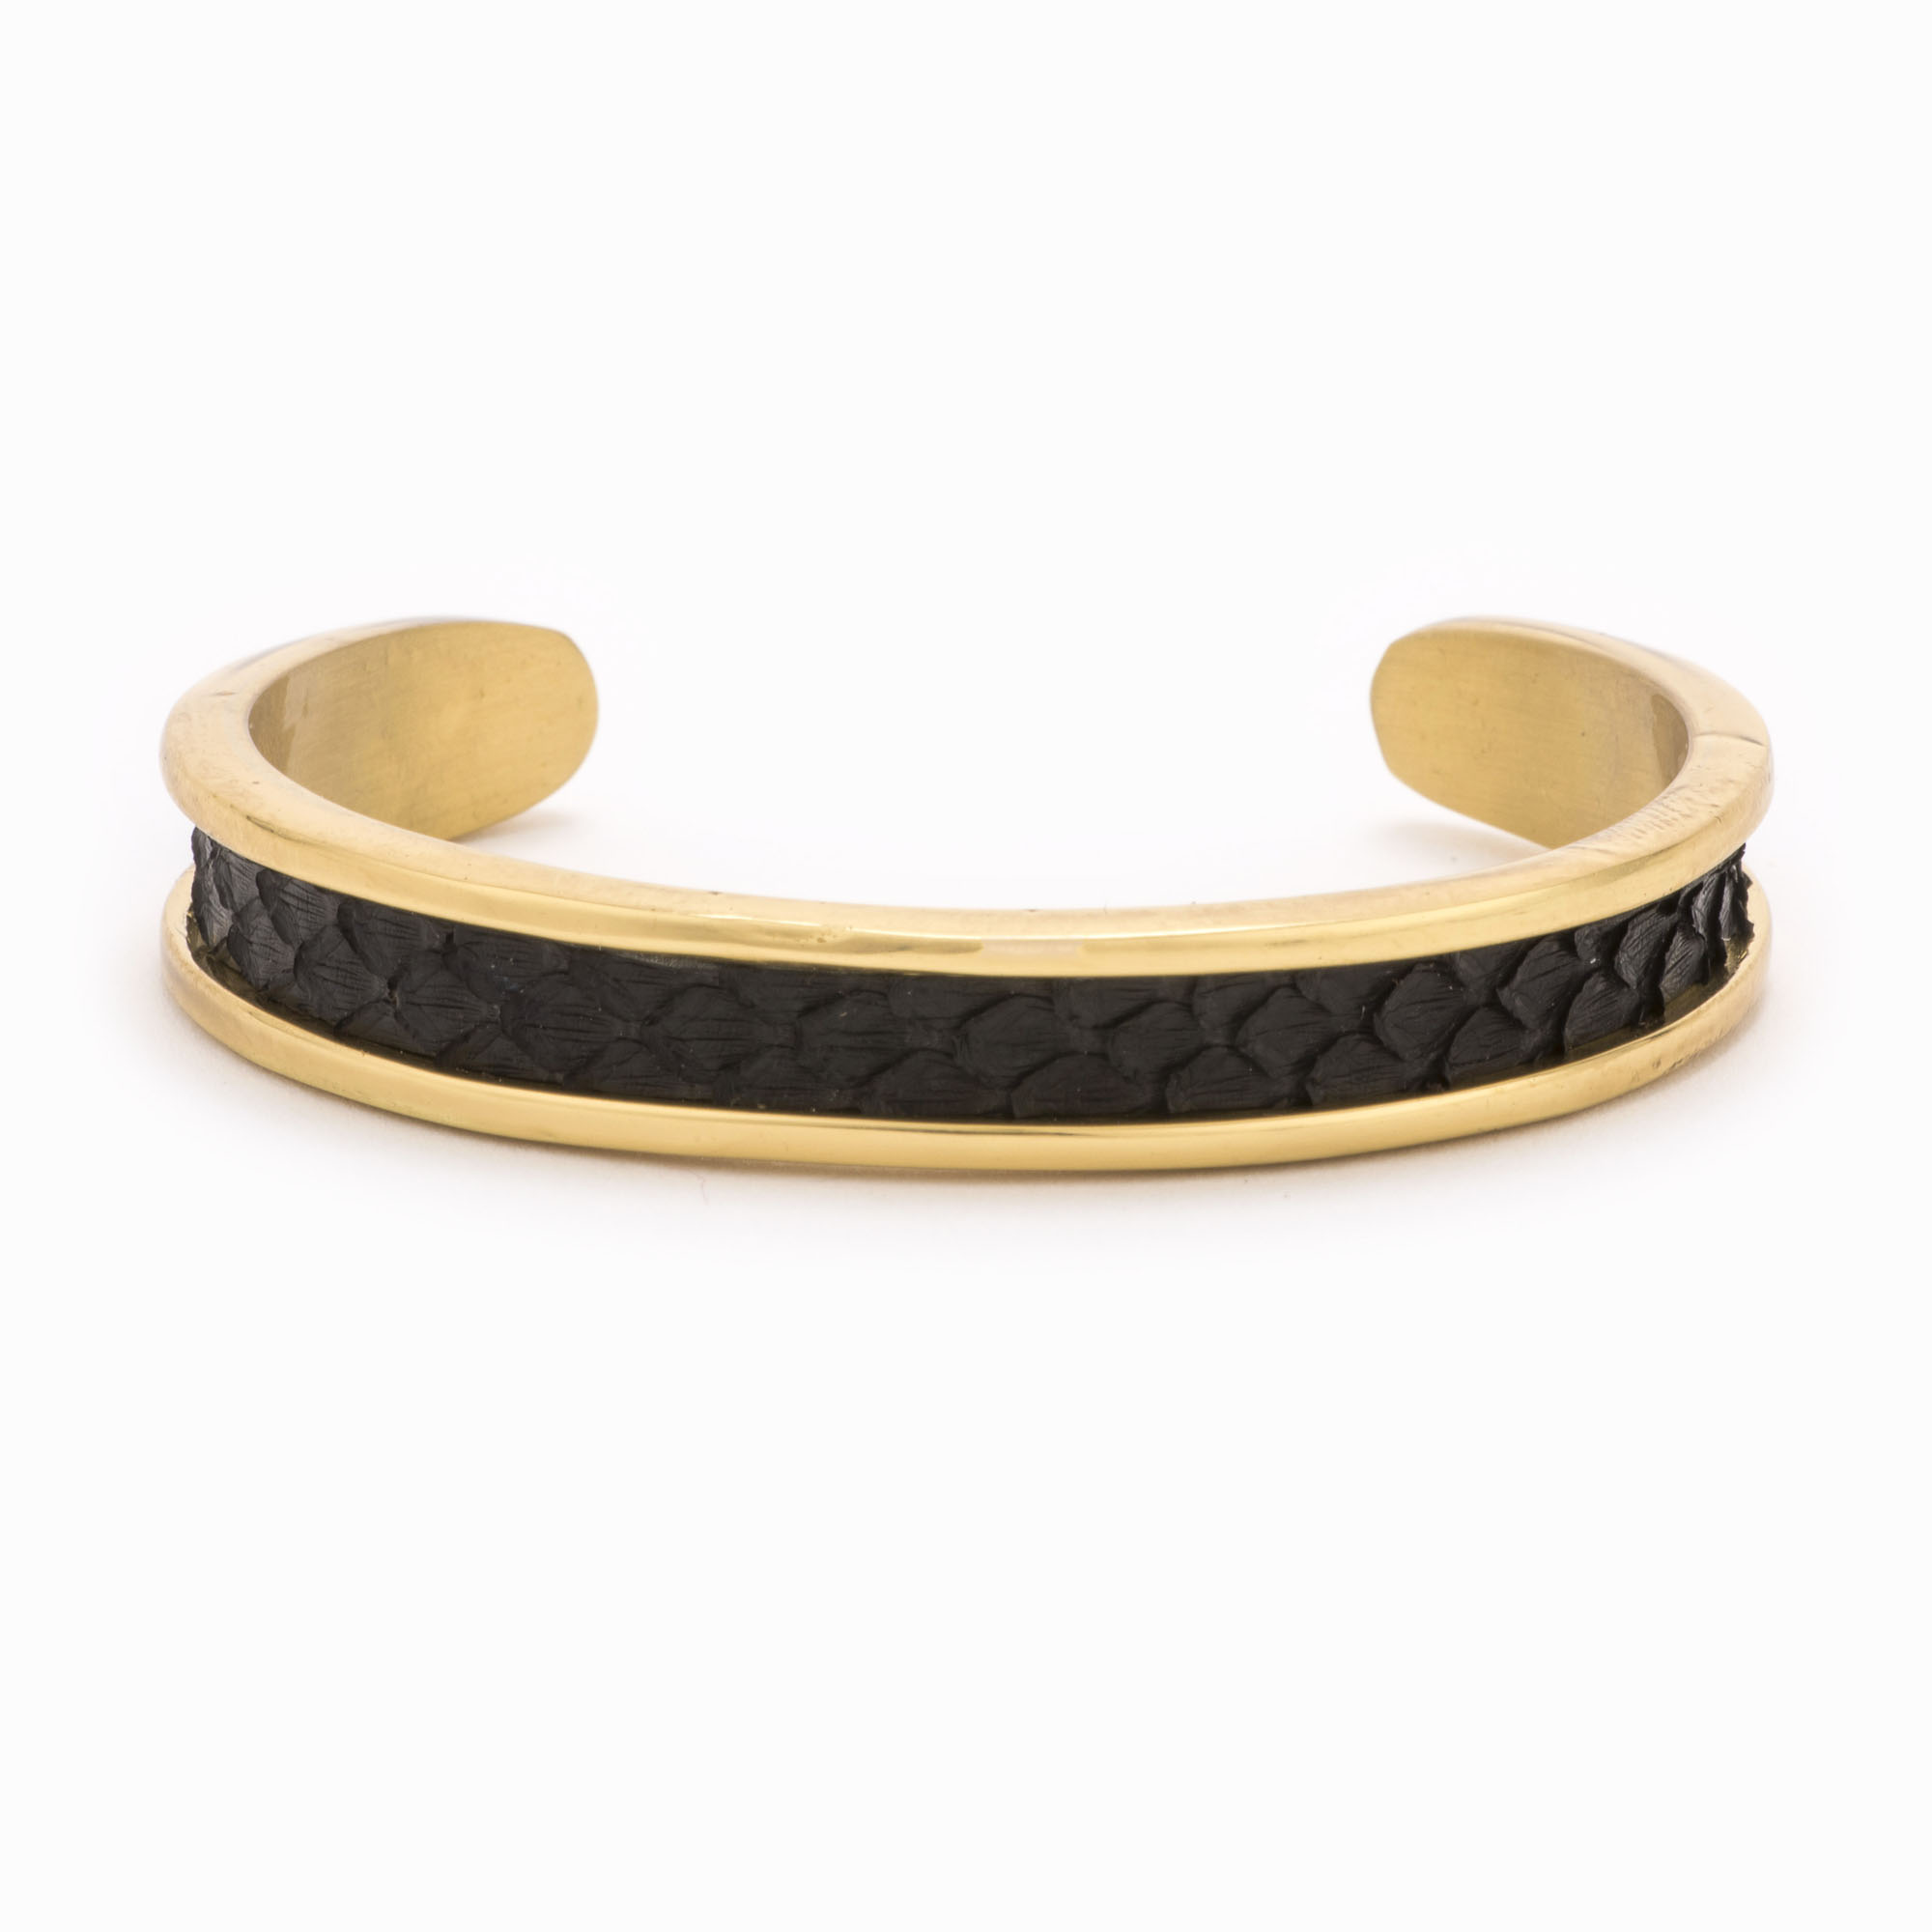 A small gold cuff with black colored snakeskin pattern inlaid.